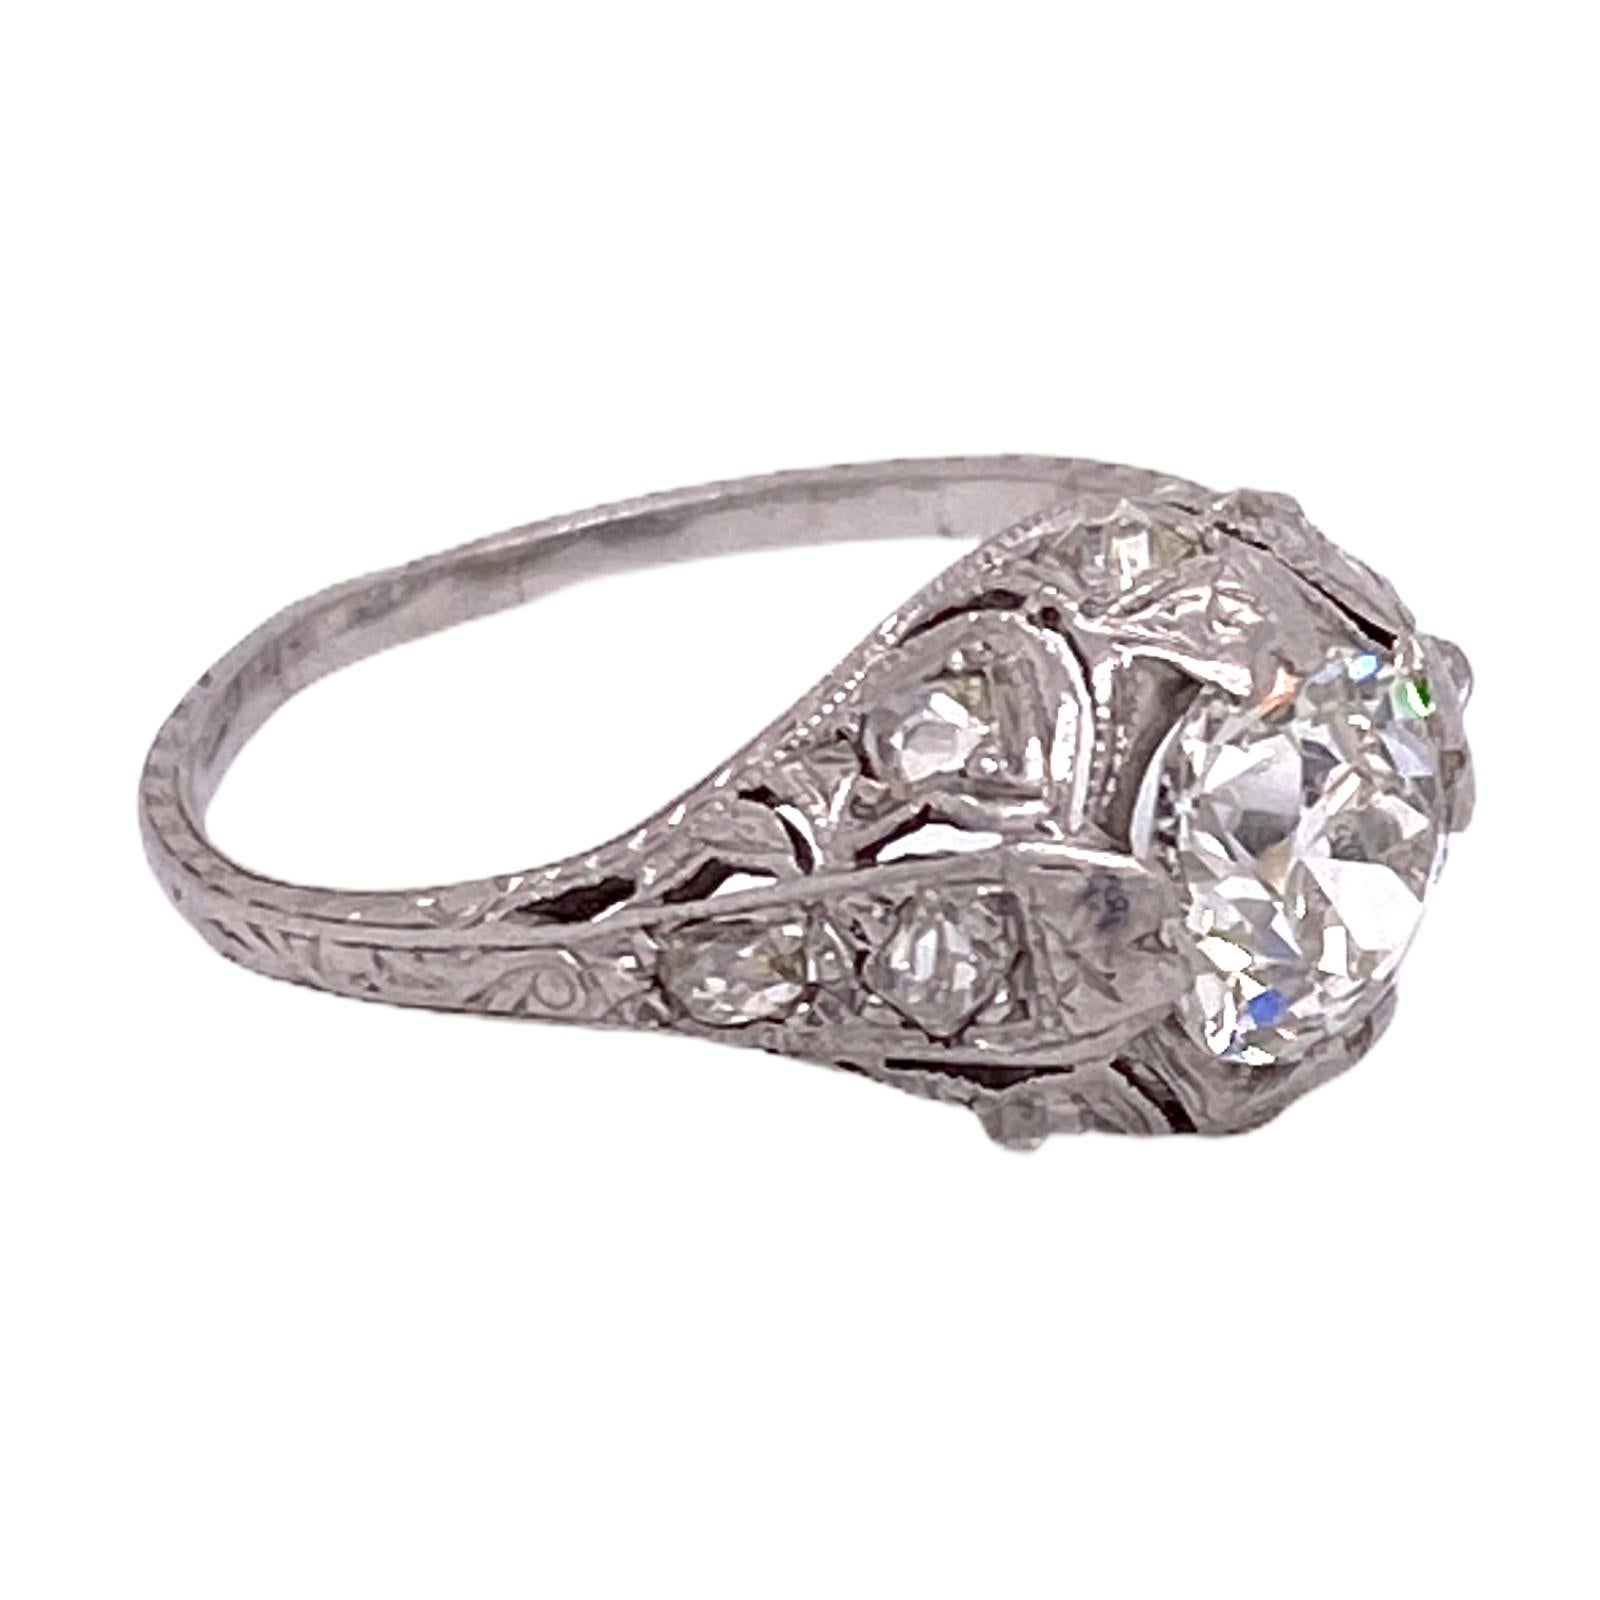 Beautiful Art Deco diamond engagement ring fashioned in platinum. The Old European cut diamond weighs approximately 1.10 carats and is graded I color and SI1 clarity (has not been removed from the mounting to send to the GIA). The filigree mounting